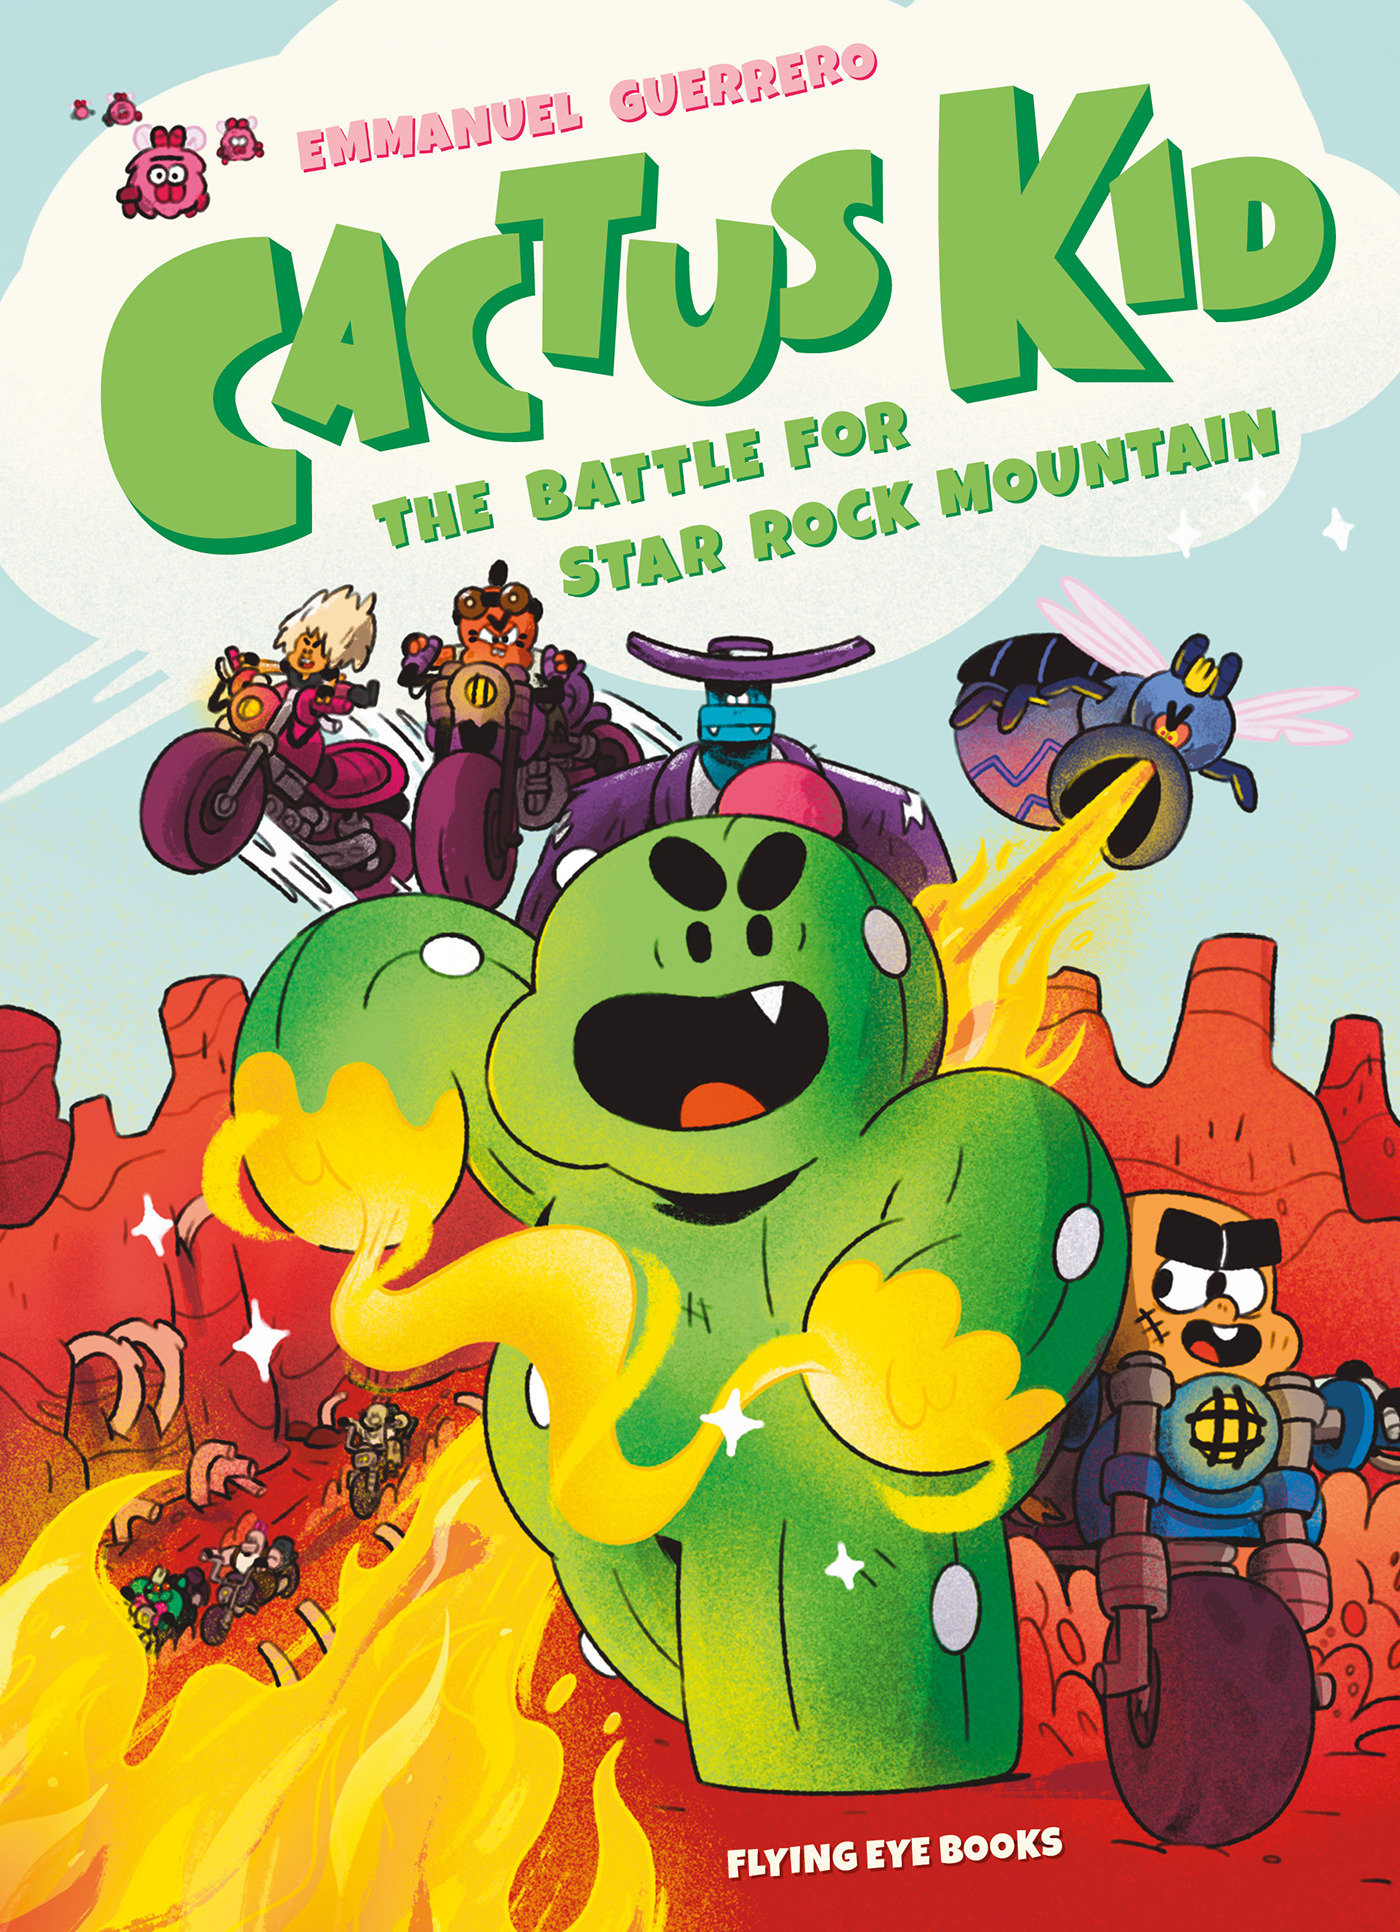 Cactus Kid and the Battle For Star Rock Mountain Graphic Novel